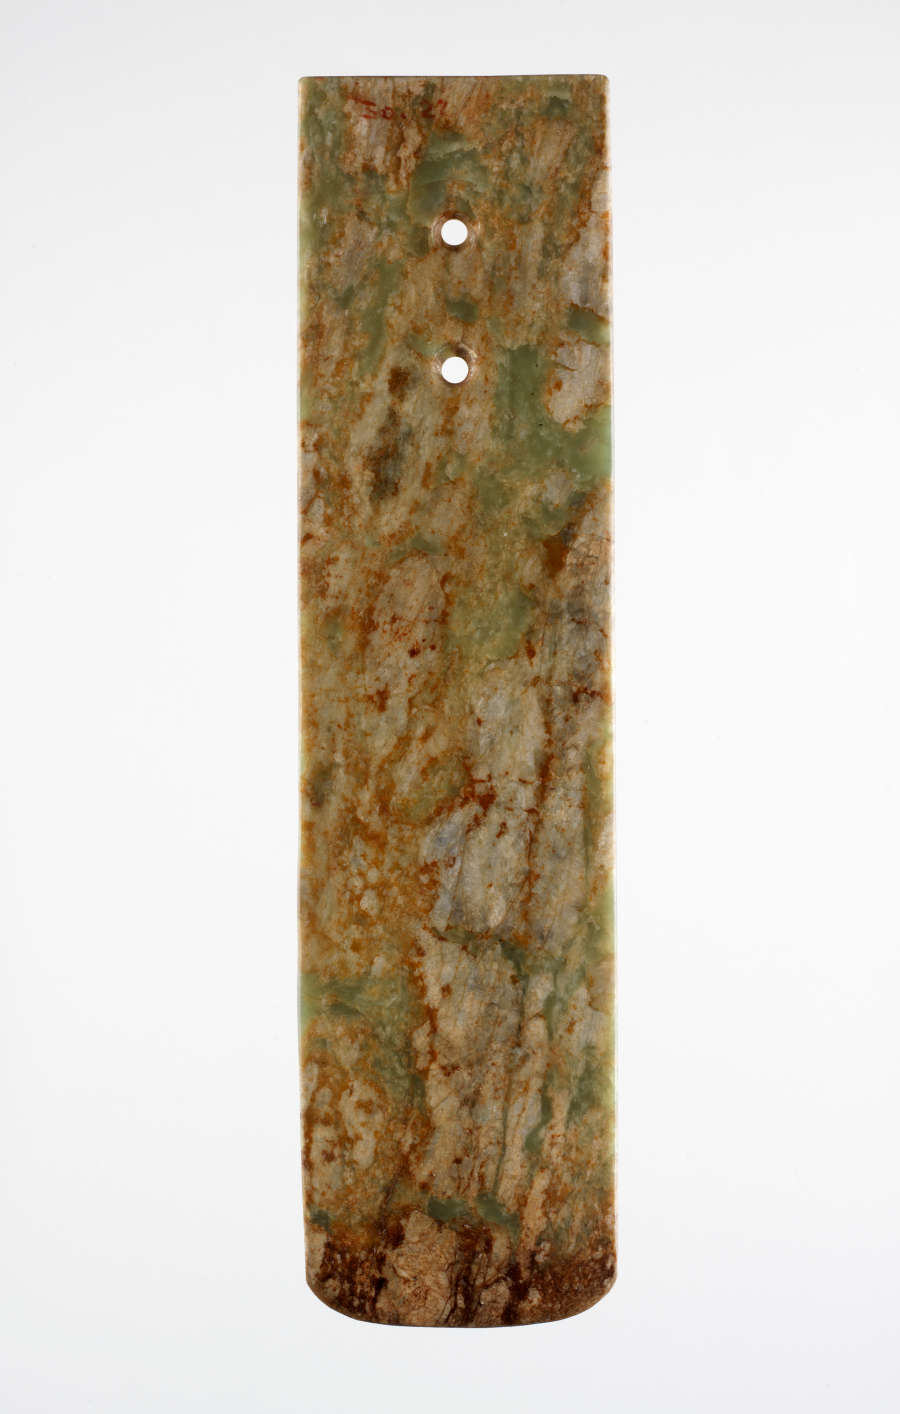 A long, rectangular stone blade with two holes punched below its top edge. The bottom edge is slightly rounded. The blade is a smooth, marbled green and brown texture.